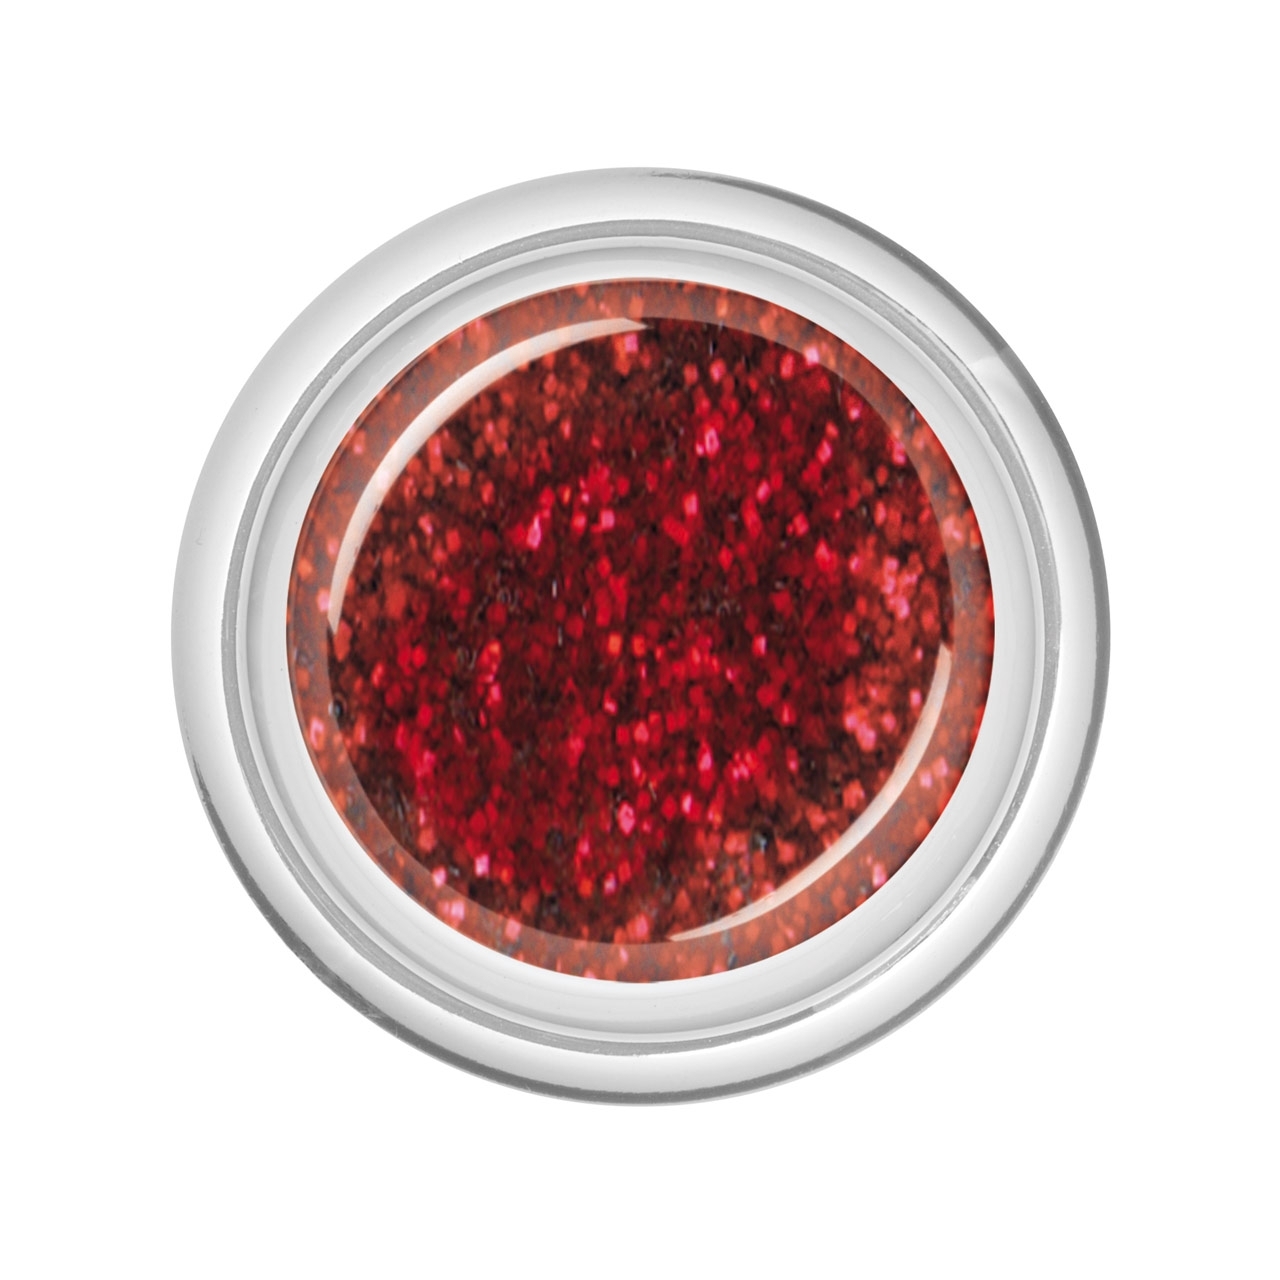 BAEHR BEAUTY CONCEPT - NAILS Colour-Gel Glitter Fire Red 5 ml